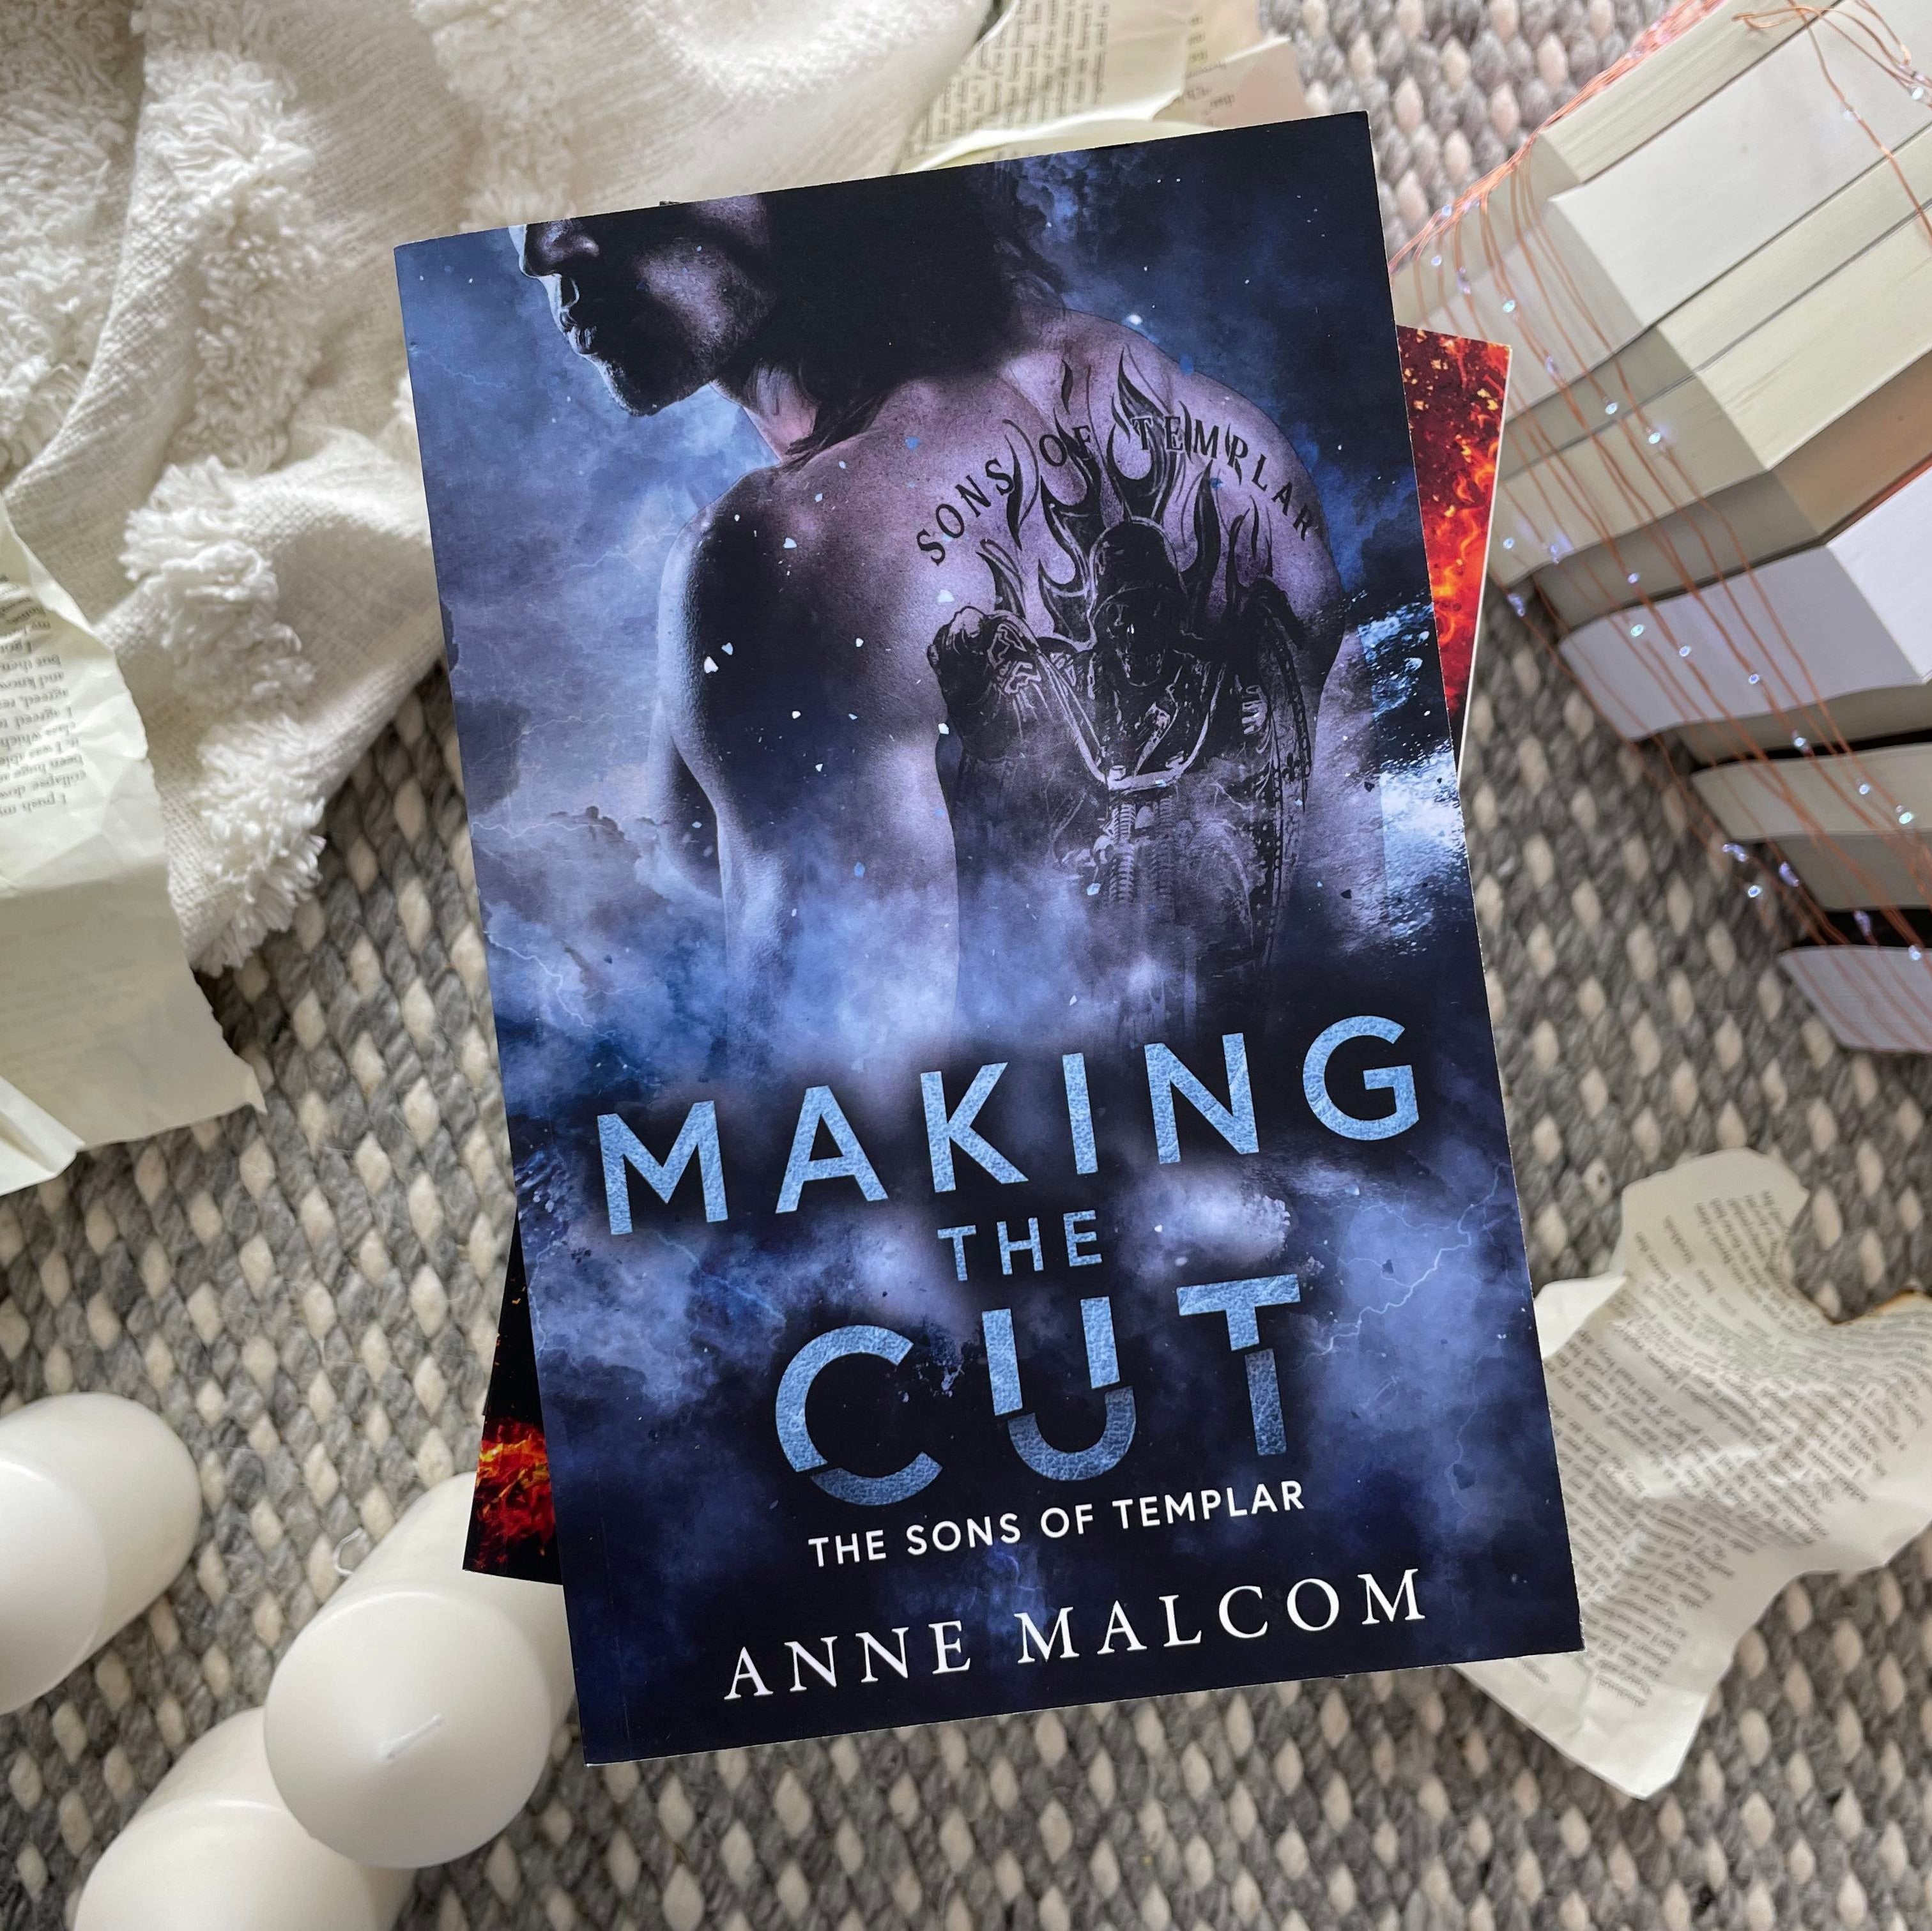 The Sons of Templar series by Anne Malcom